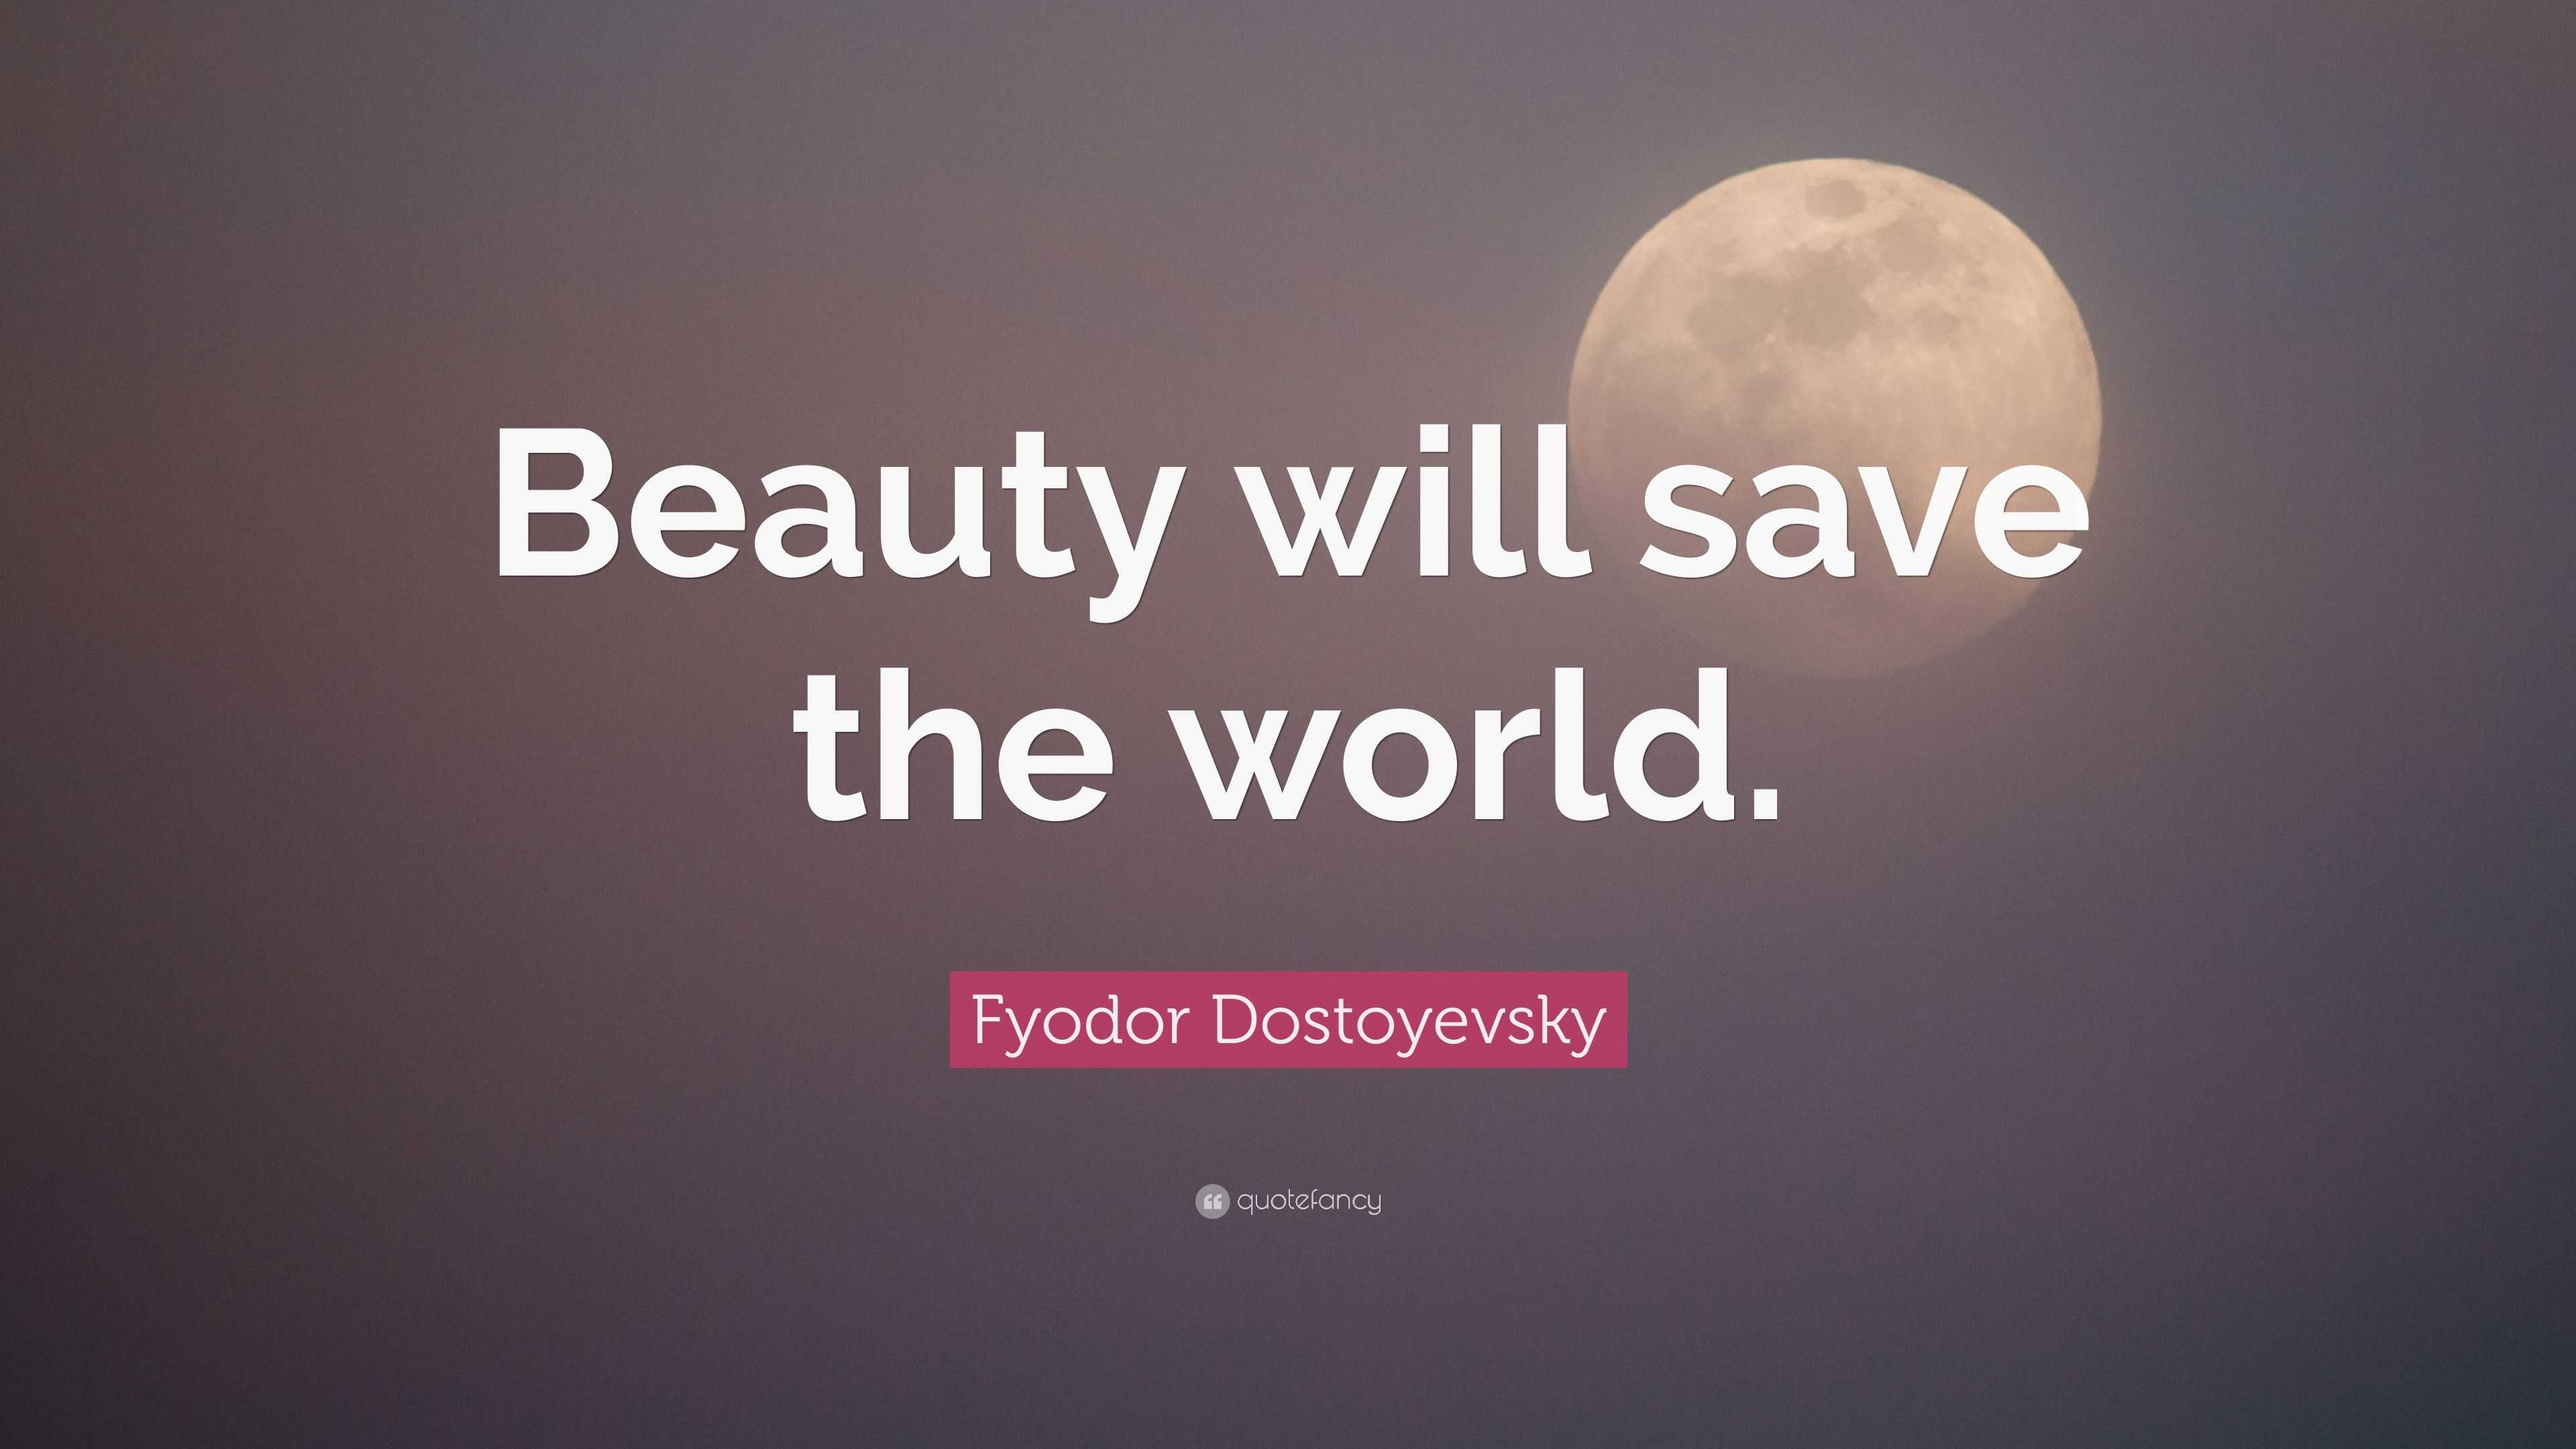 Fyodor Dostoyevsky Quote: “Beauty will save the world.” (12 wallpapers